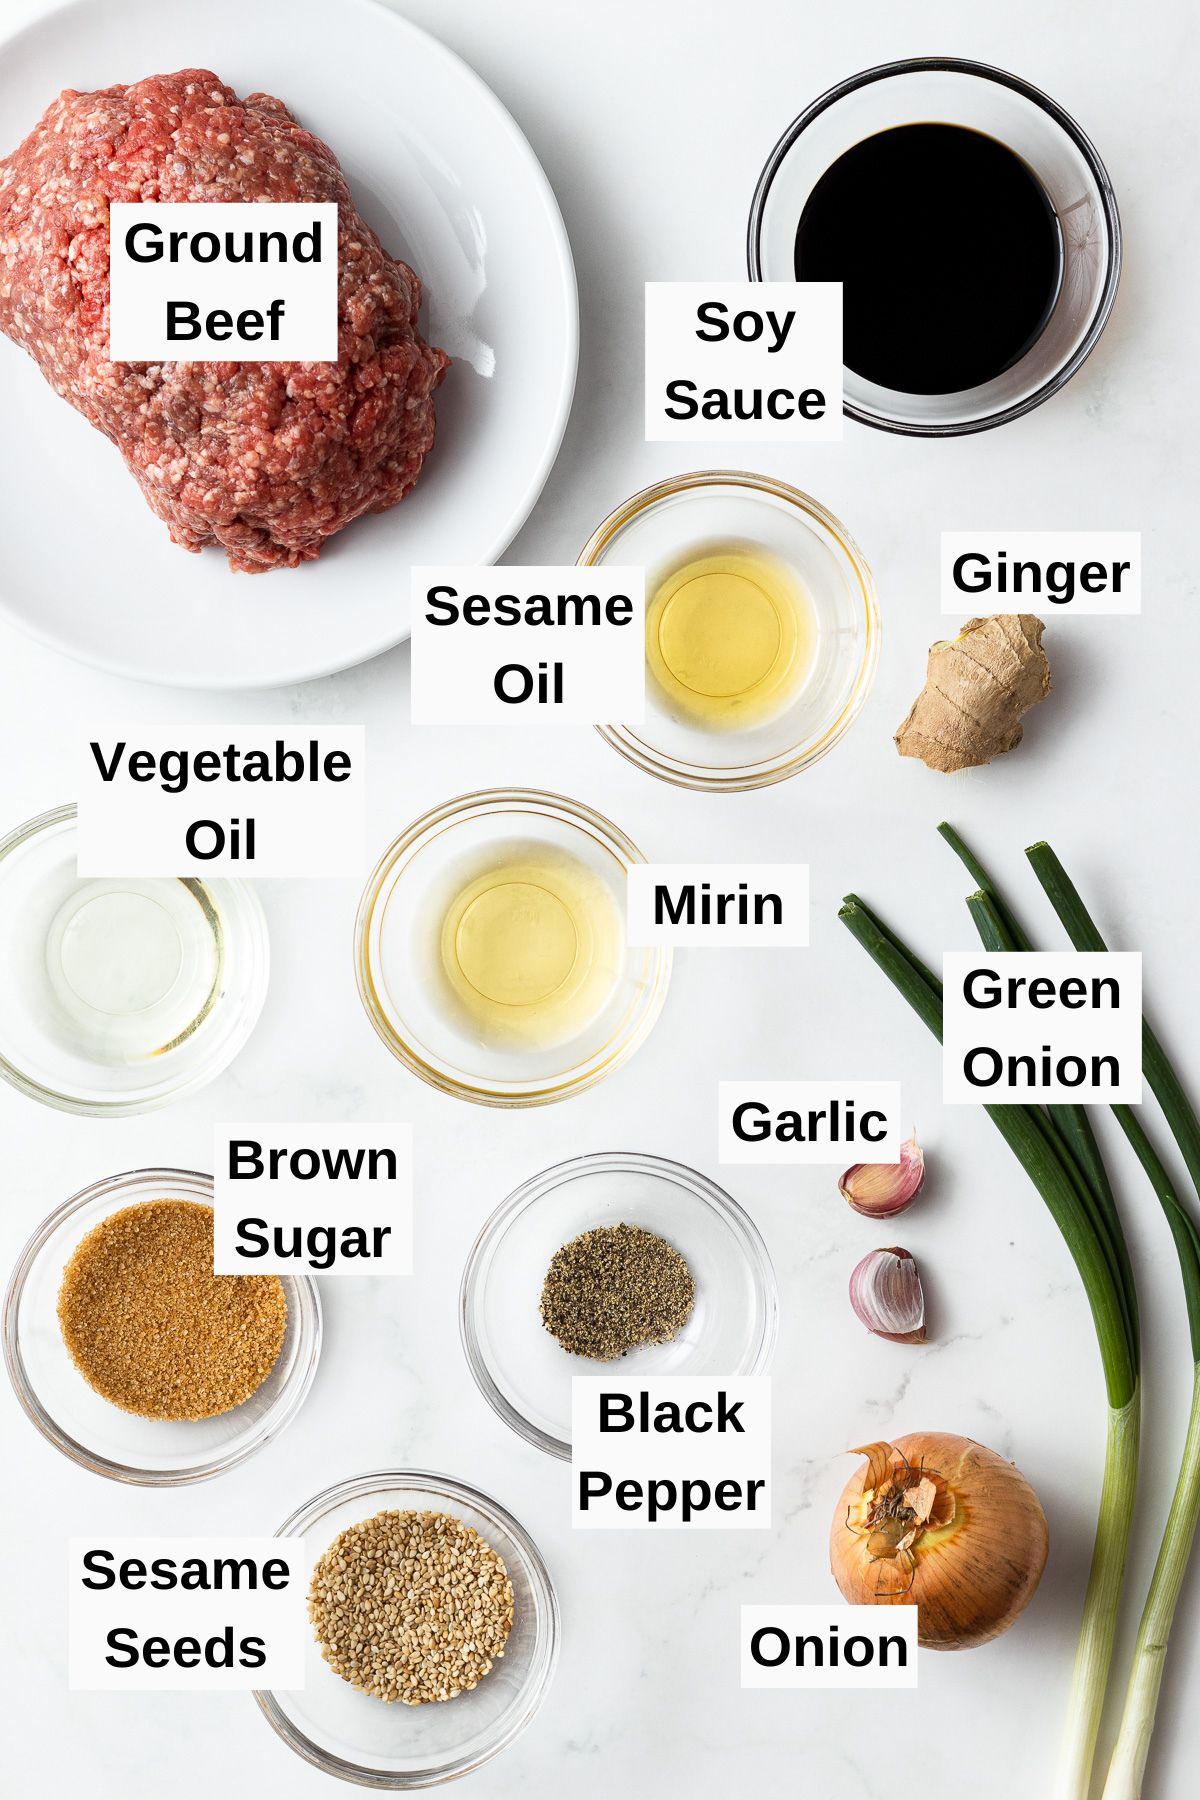 ingredients for ground beef bulgogi on a table